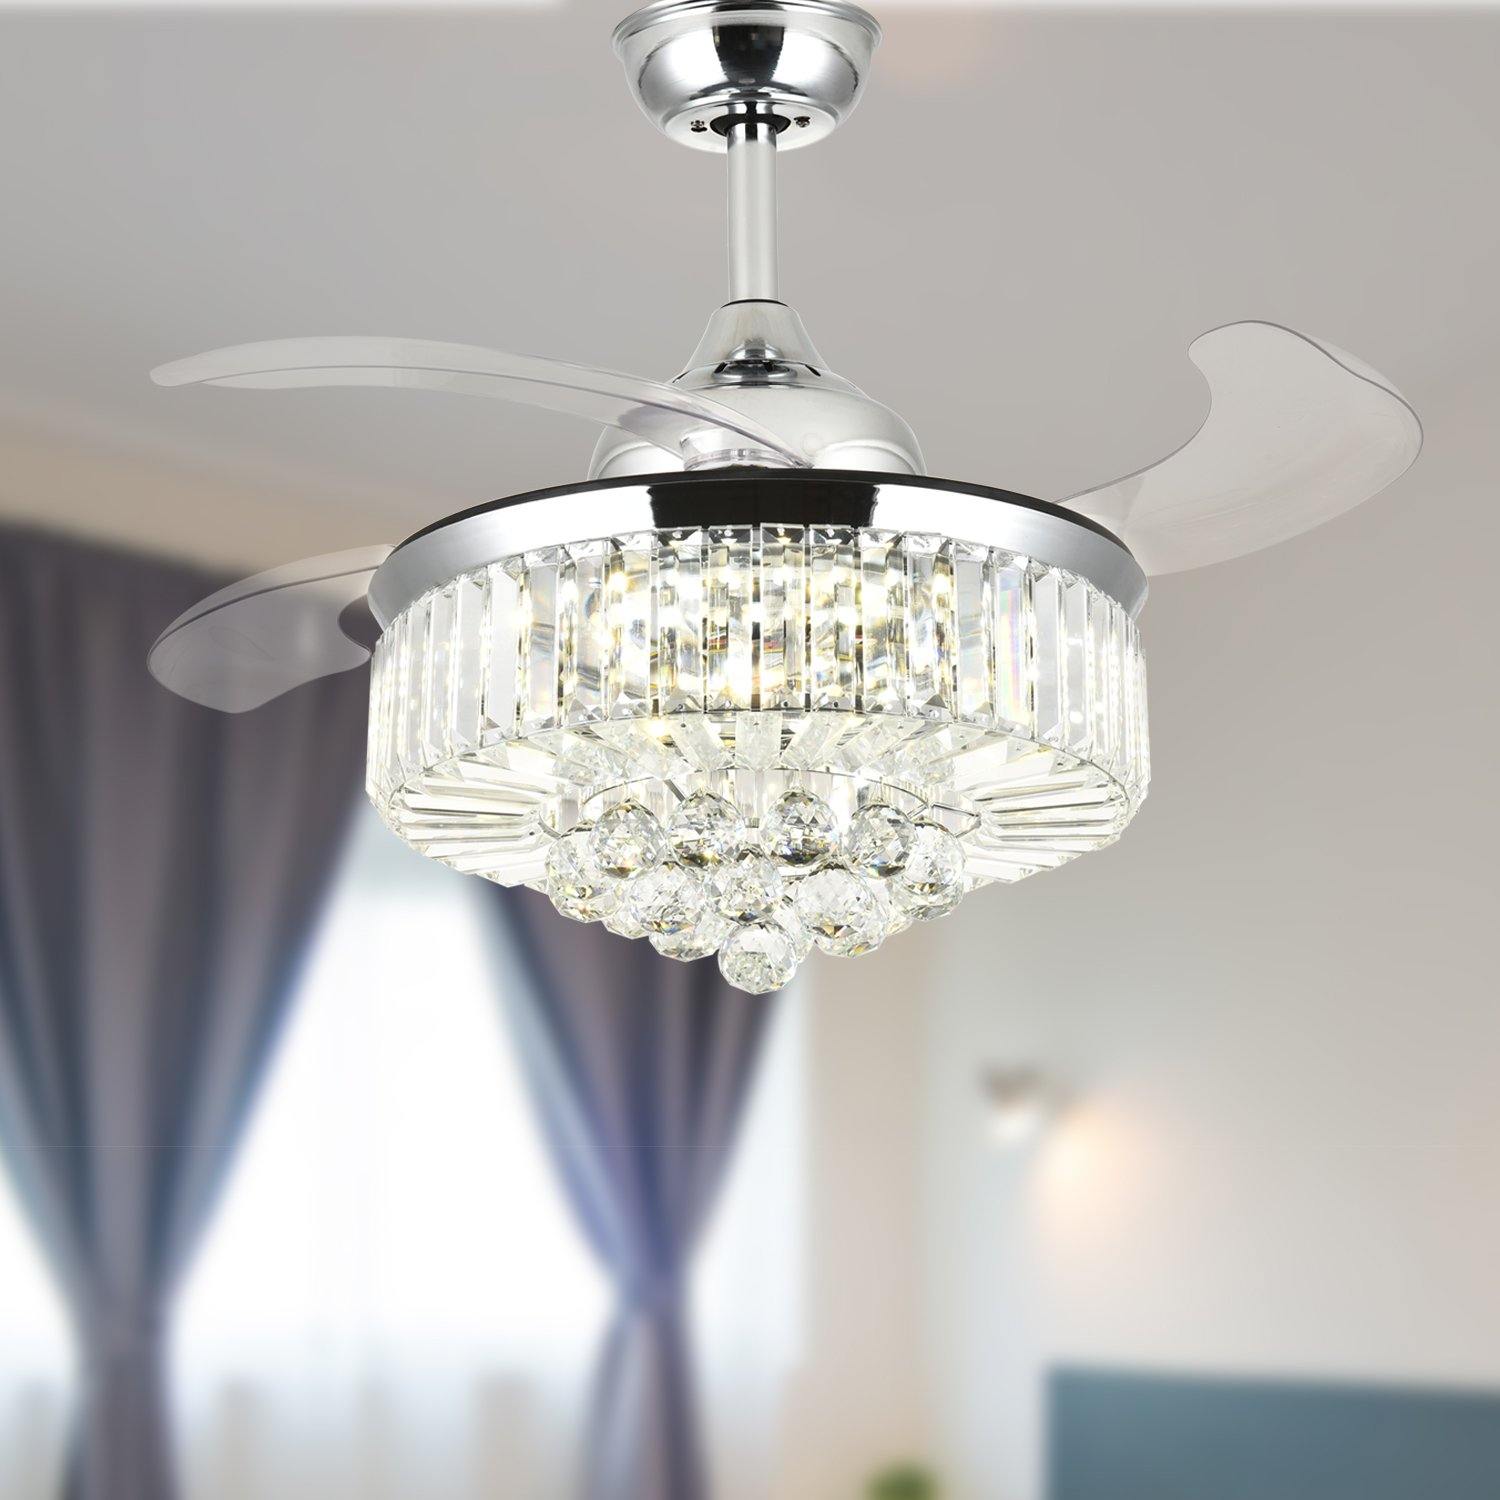 Crystal Ceiling Fans With Retractable Blades And Dimmable Lights 36 Chrome